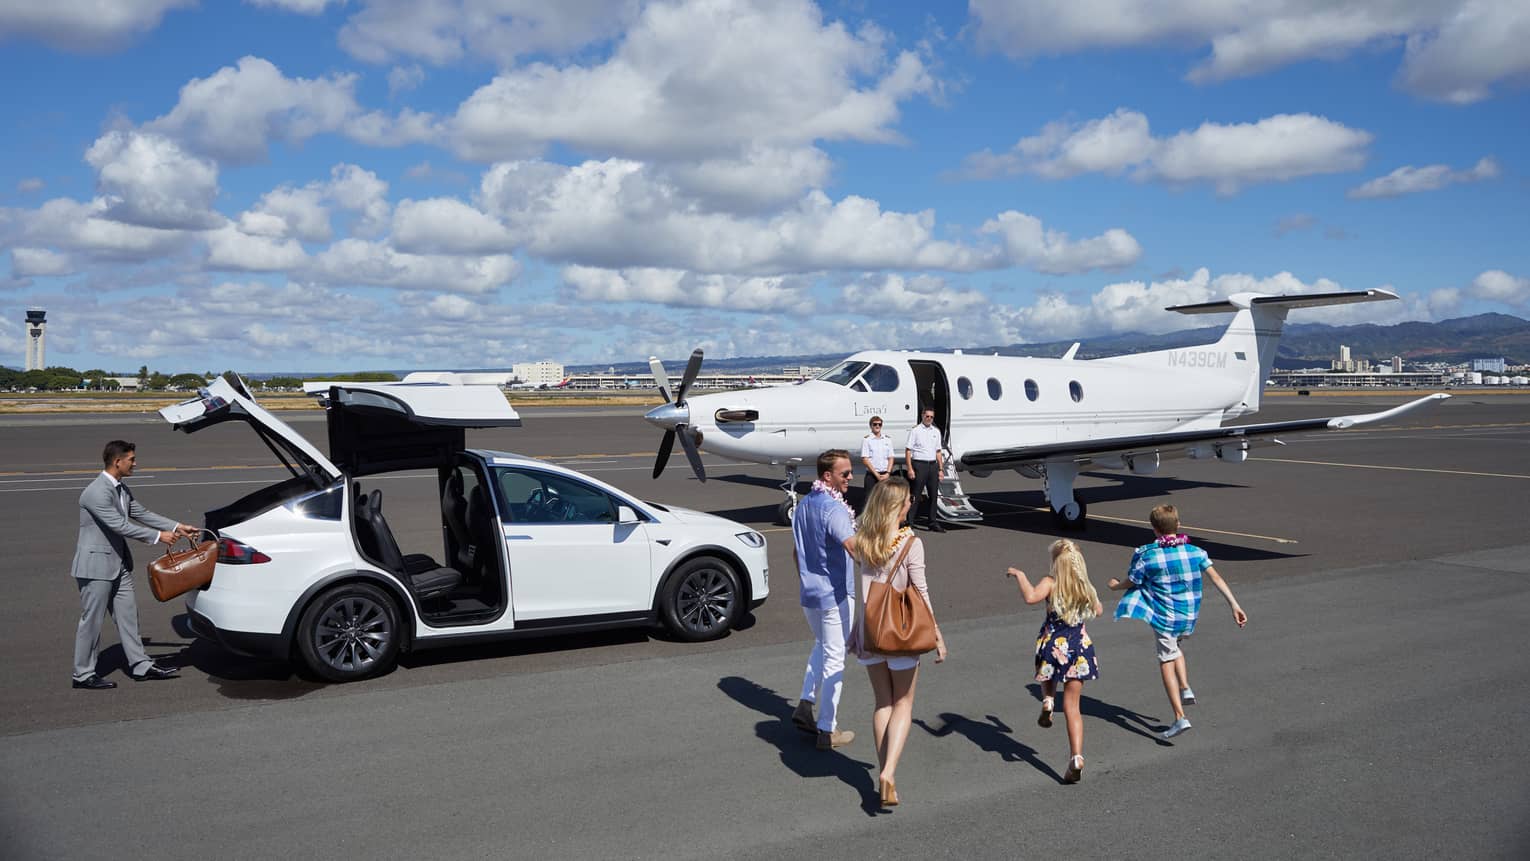 A family of four walks toward private plane while a man takes a suitcase out of a white car